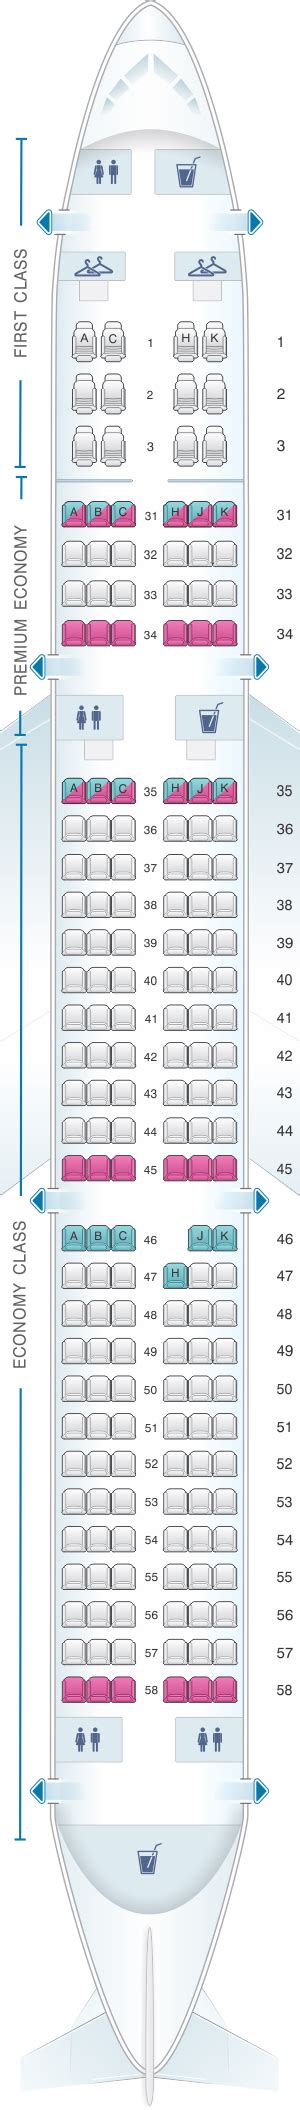 China Southern Airbus A321 Seat Map Updated Find The Best Seat Seatmaps